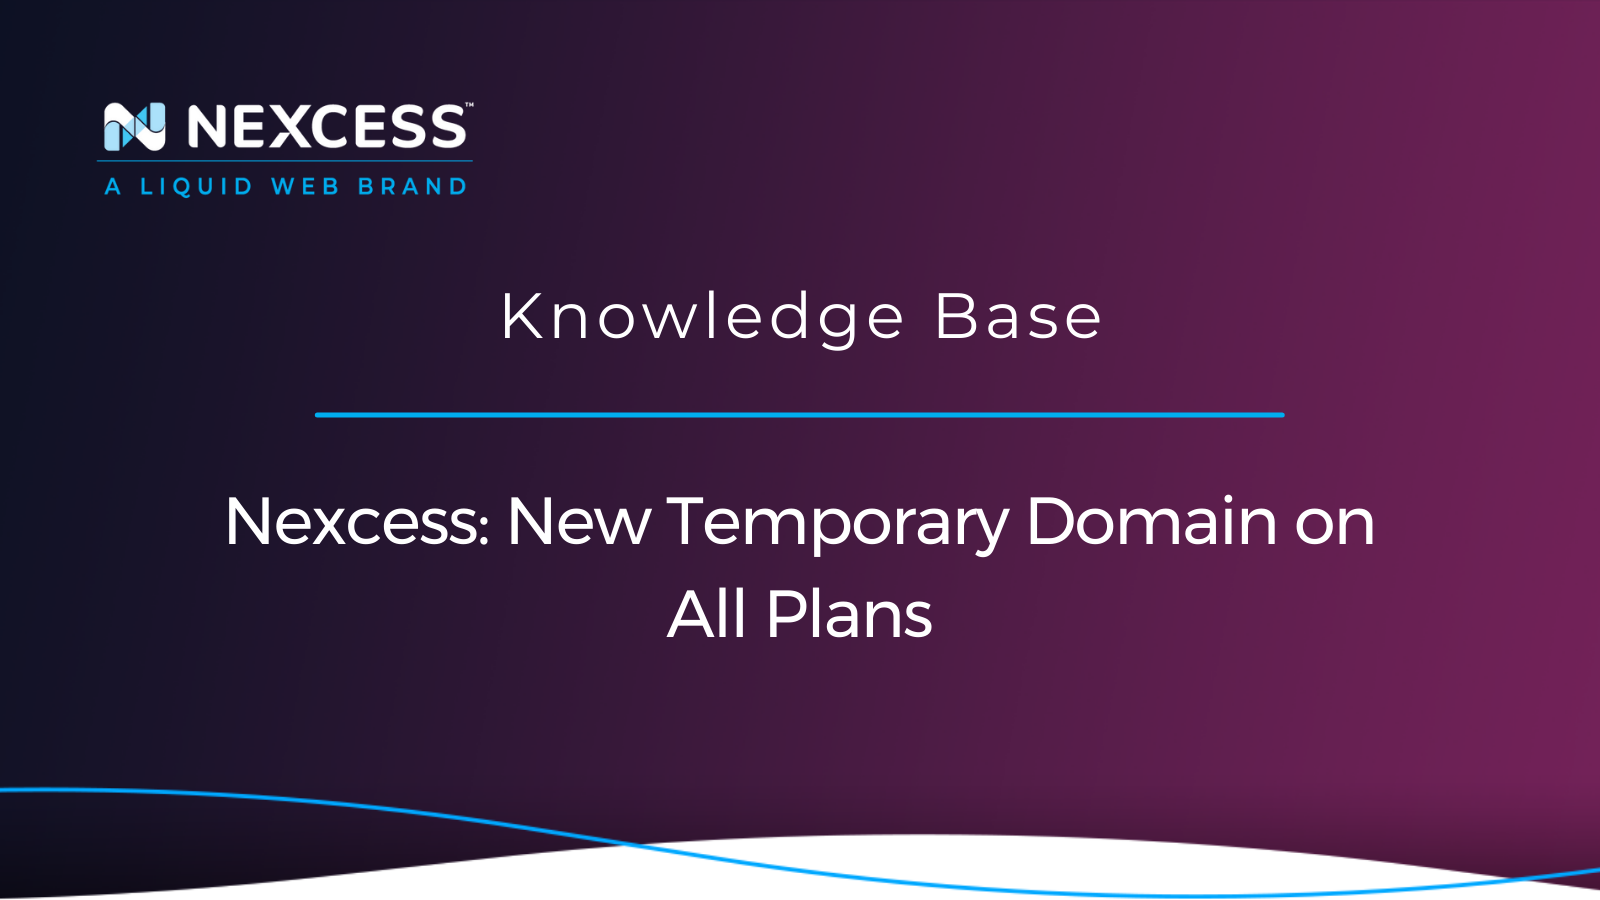 Nexcess: New Temporary Domain on All Plans